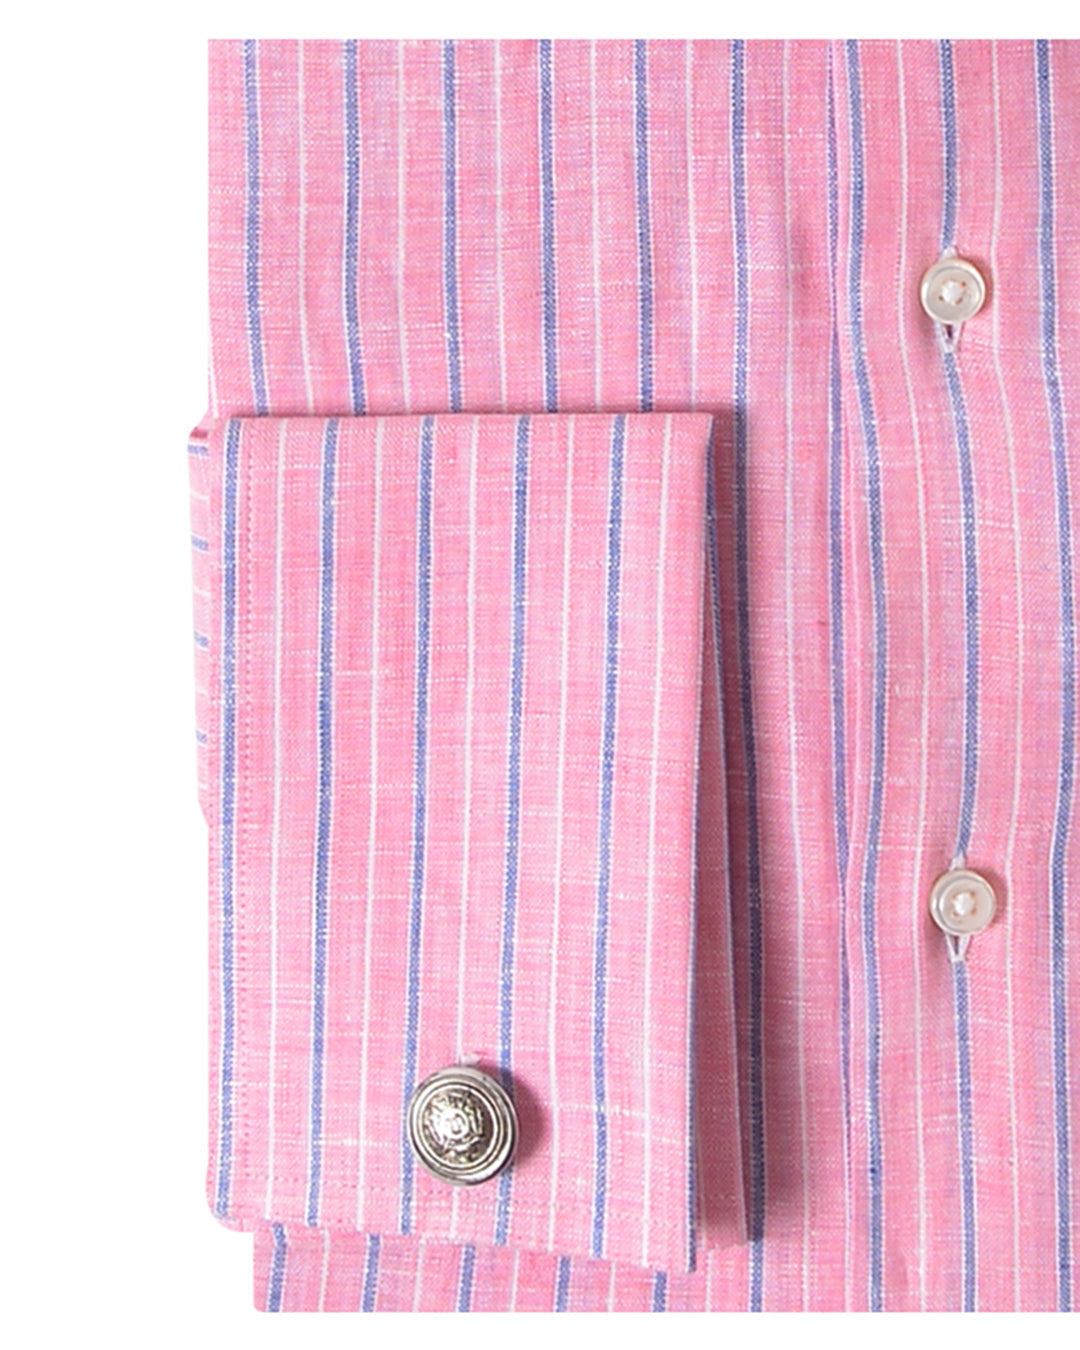 Cuff up of the custom linen shirt for men in pink and blue stripes by Luxire Clothing